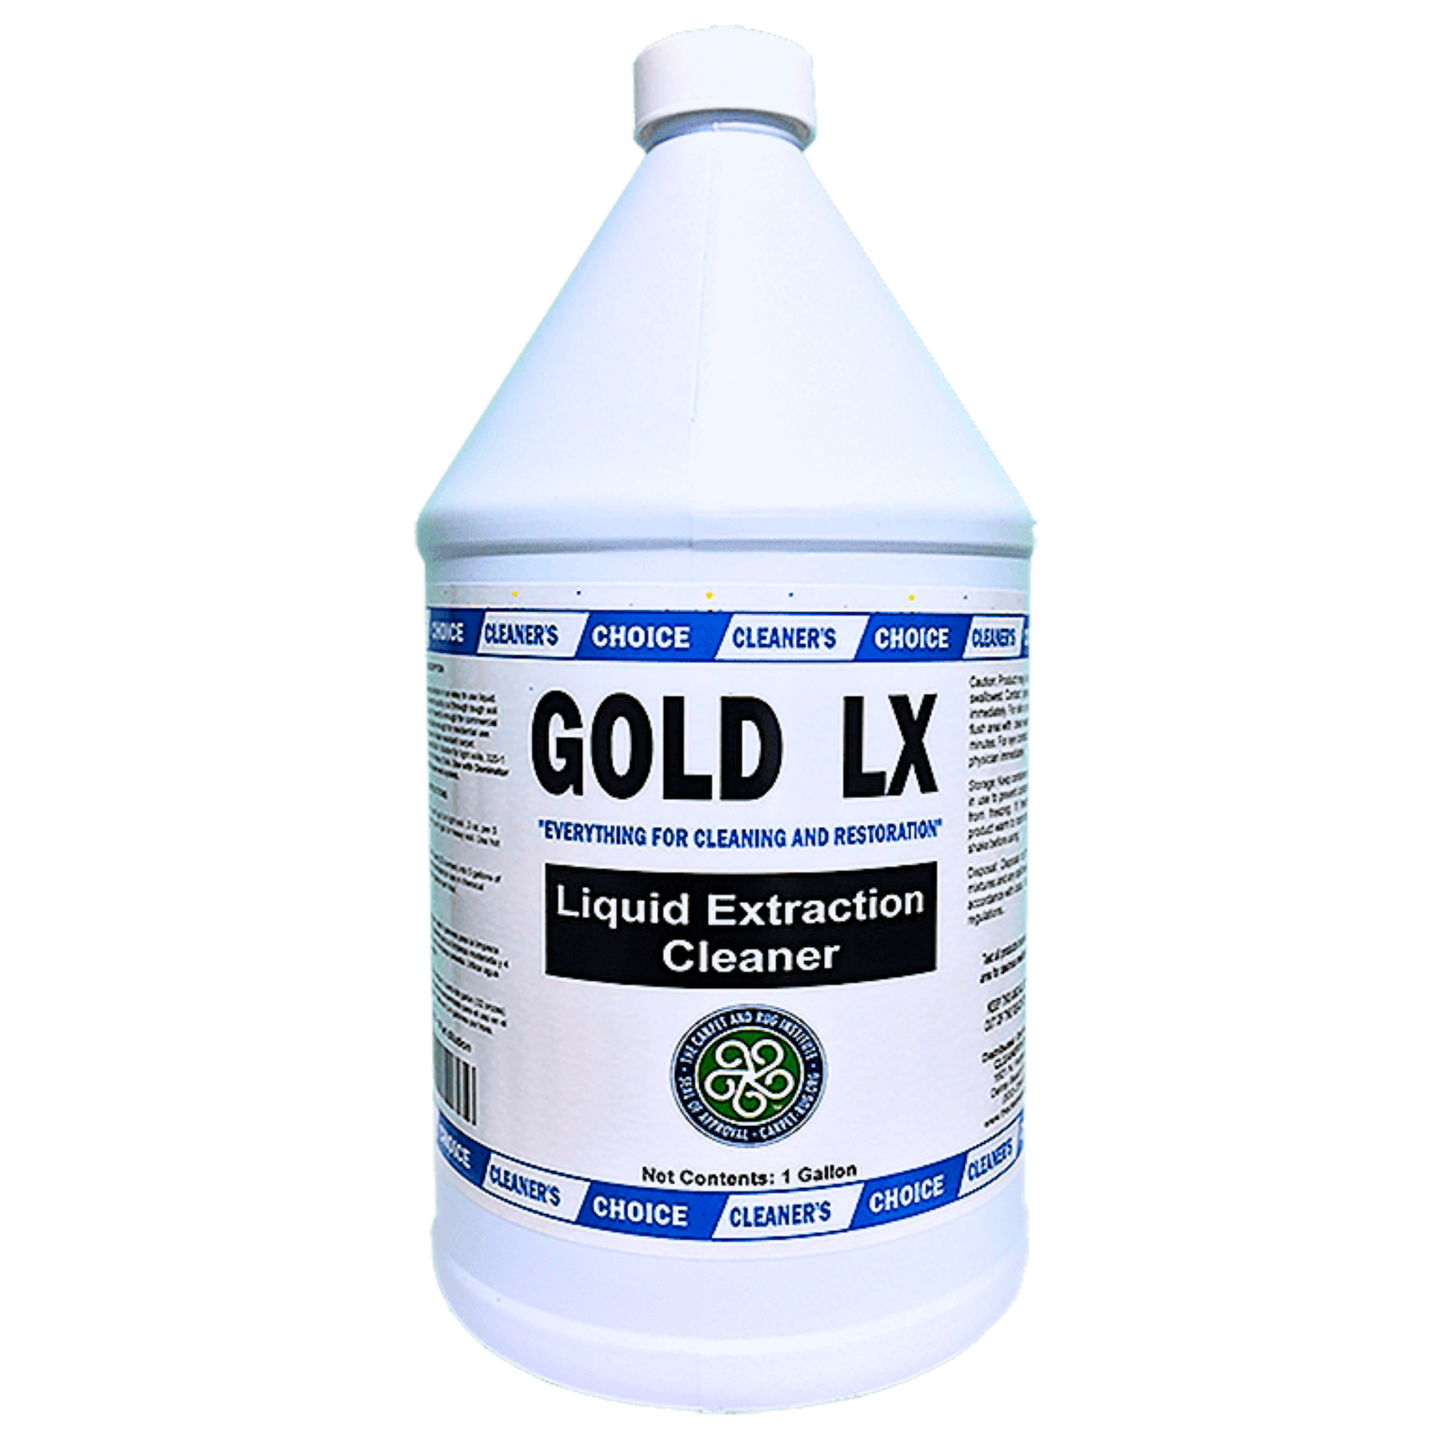 GOLD LX, Powerful Carpet Cleaner for Residential and Commercial Use (1 gal)